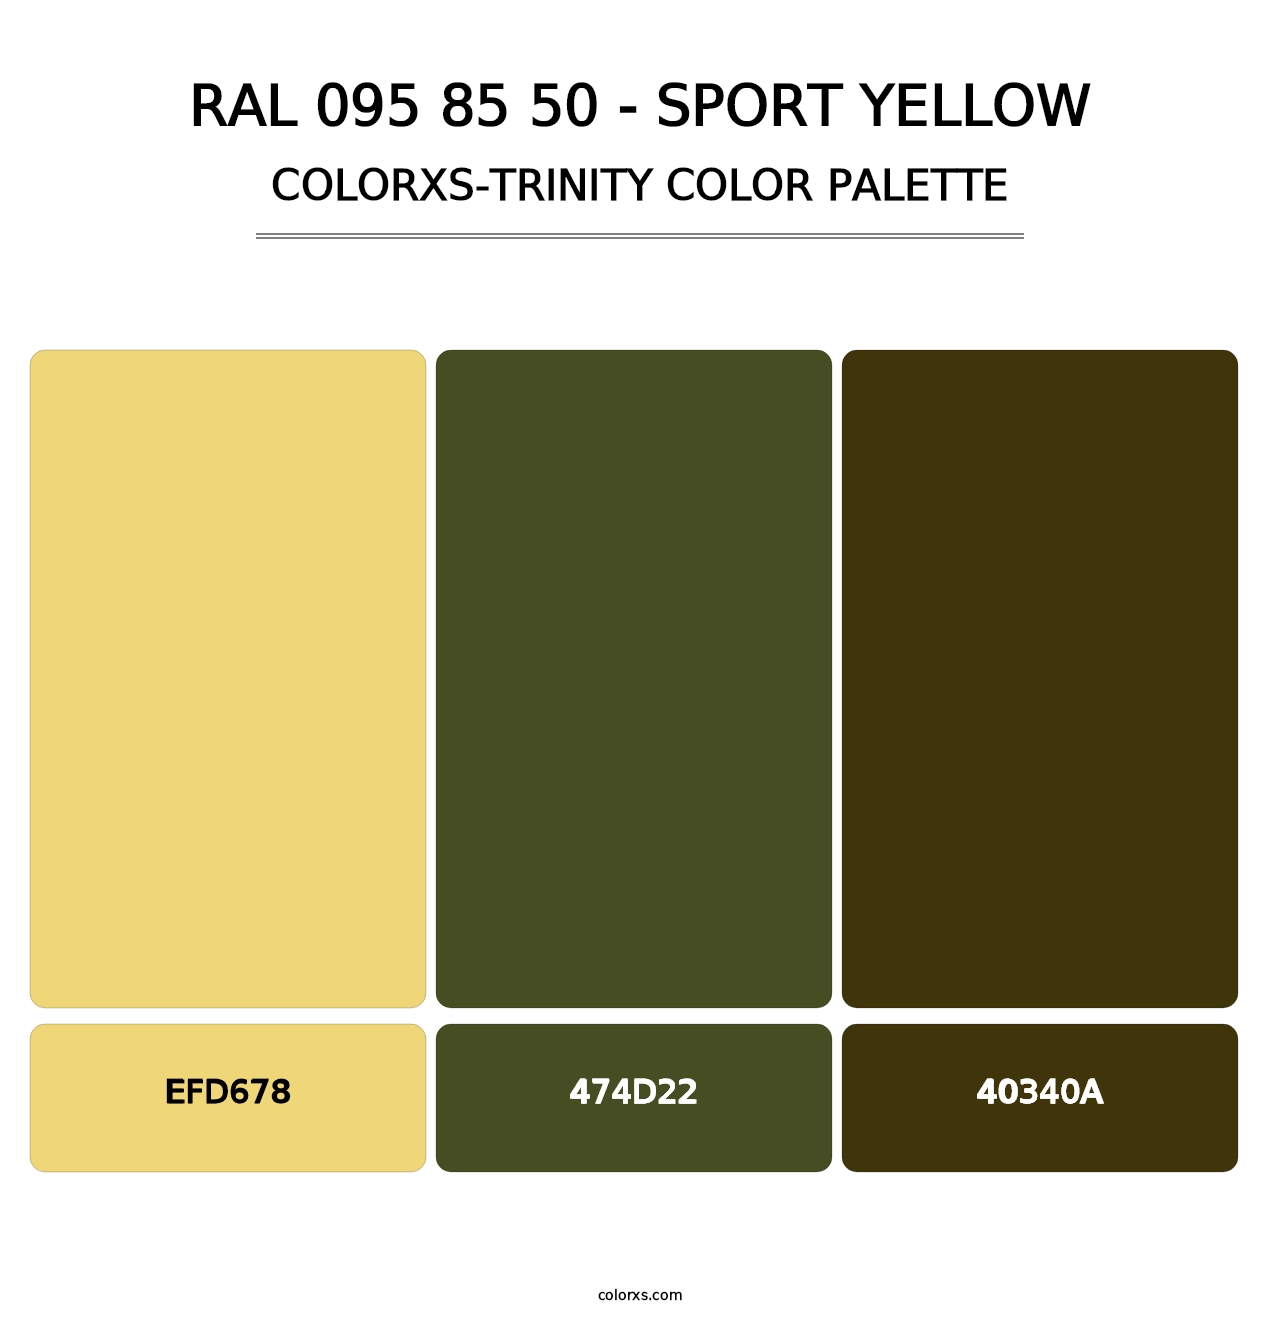 RAL 095 85 50 - Sport Yellow - Colorxs Trinity Palette